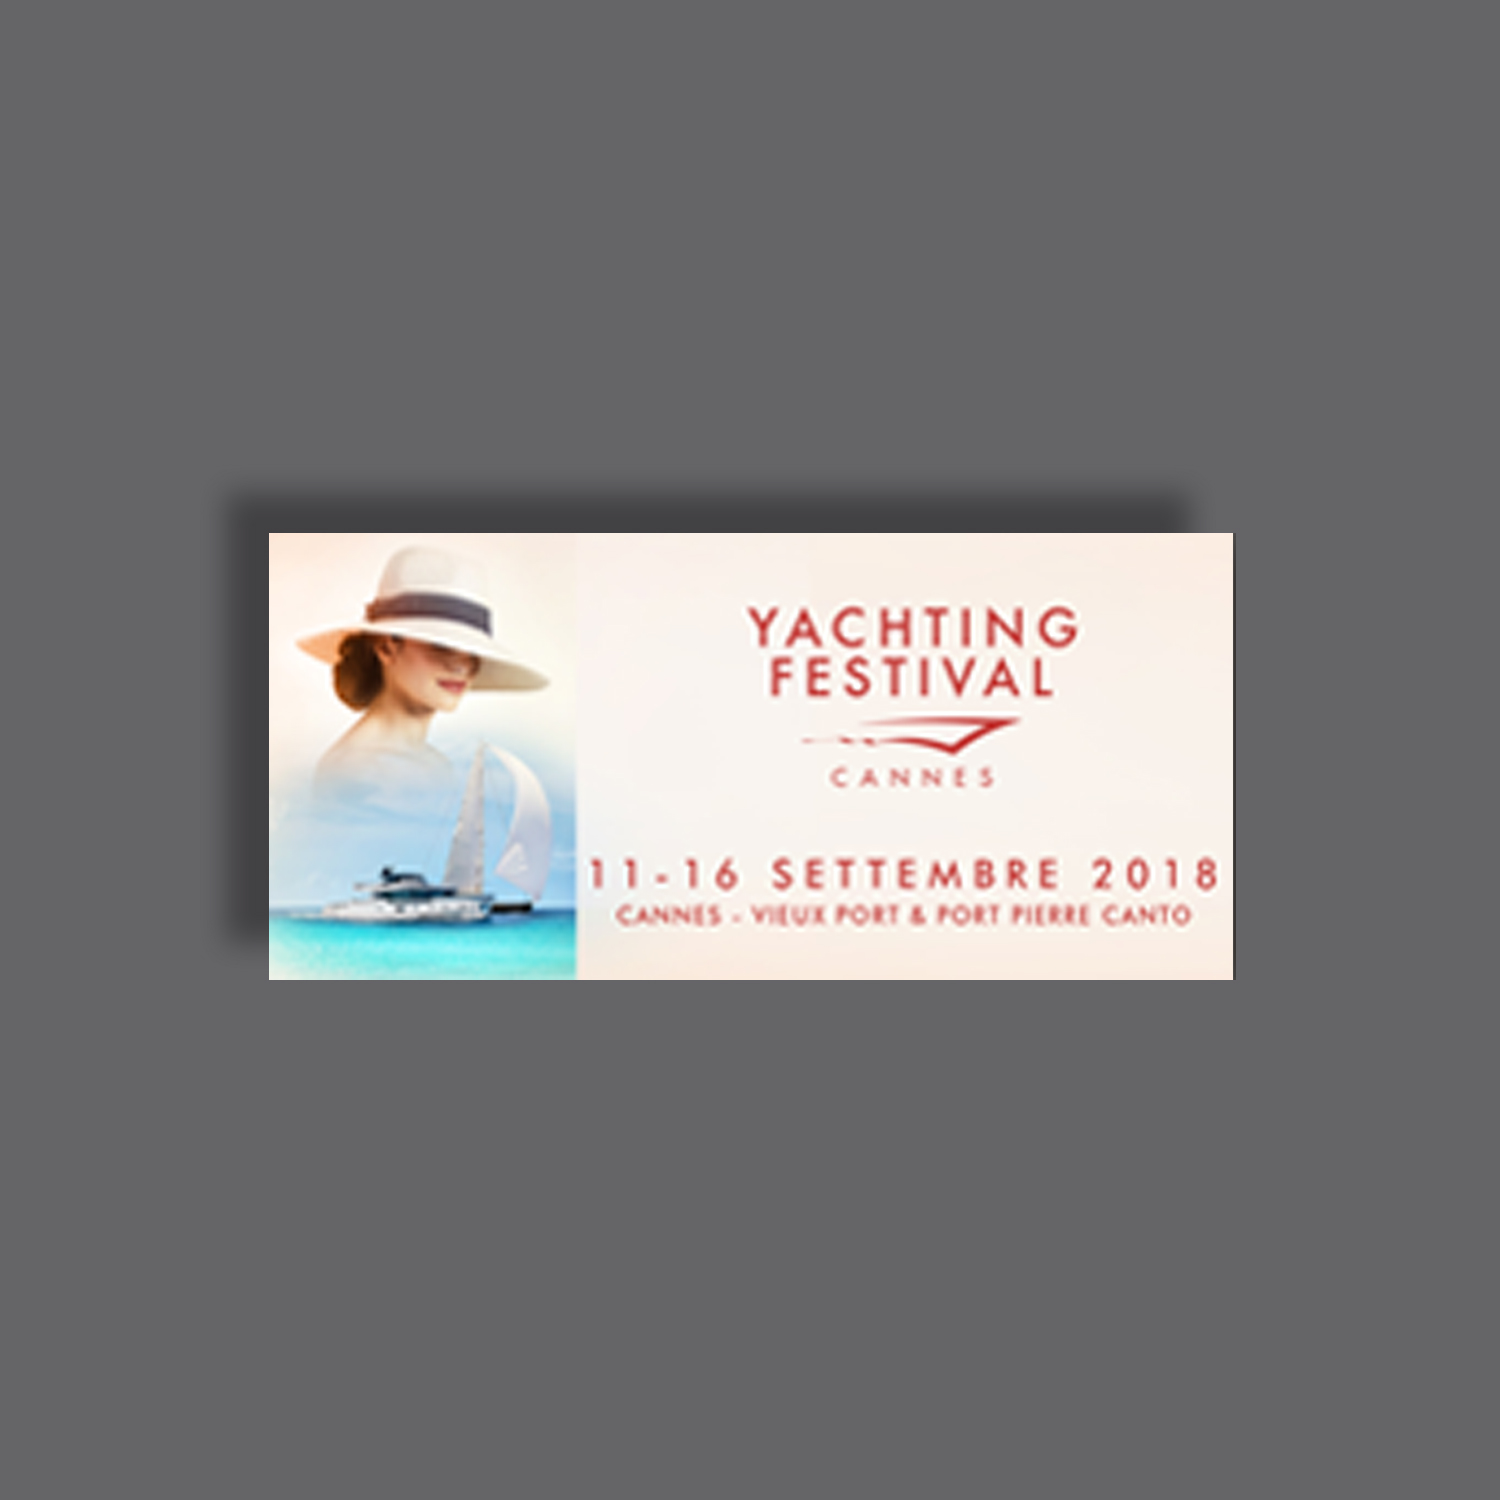 2018 Yachting Festival Cannes